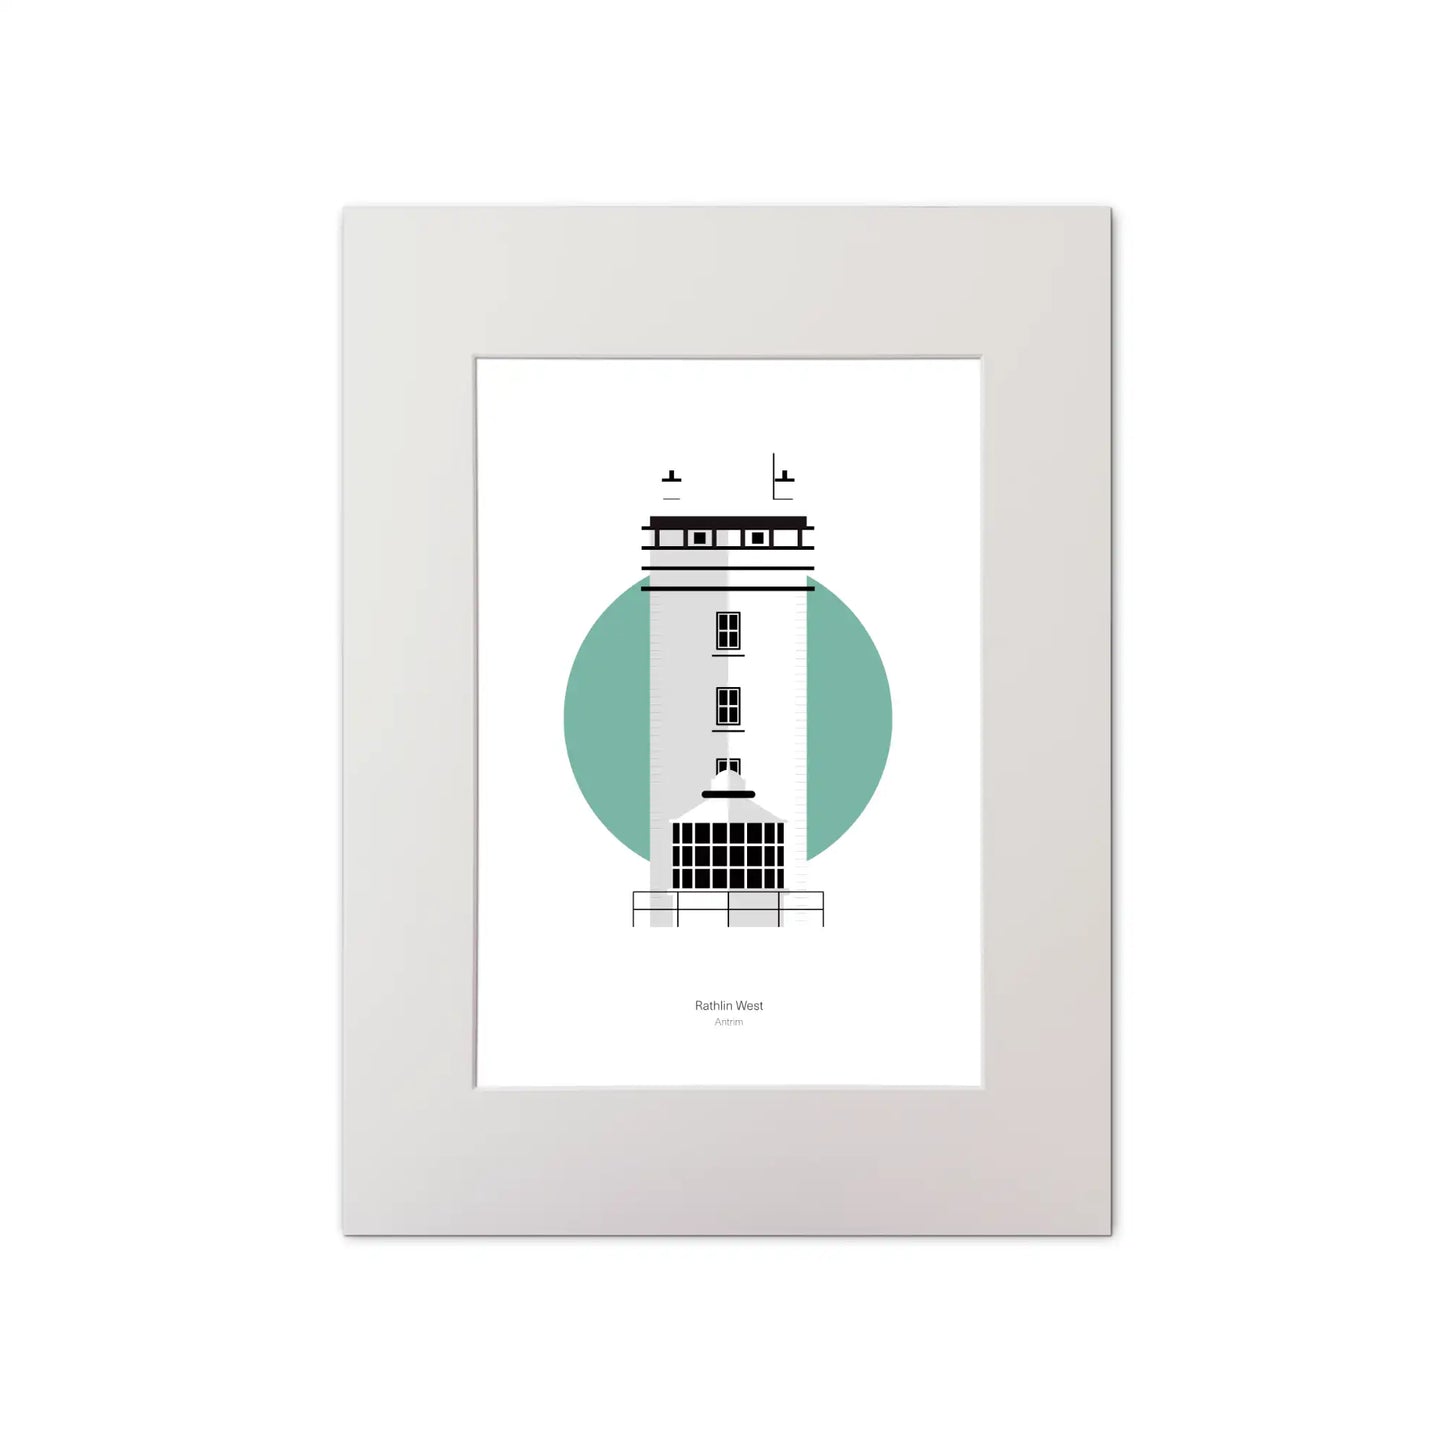 Illustration of Rathlin West lighthouse on a white background inside light blue square, mounted and measuring 30x40cm.